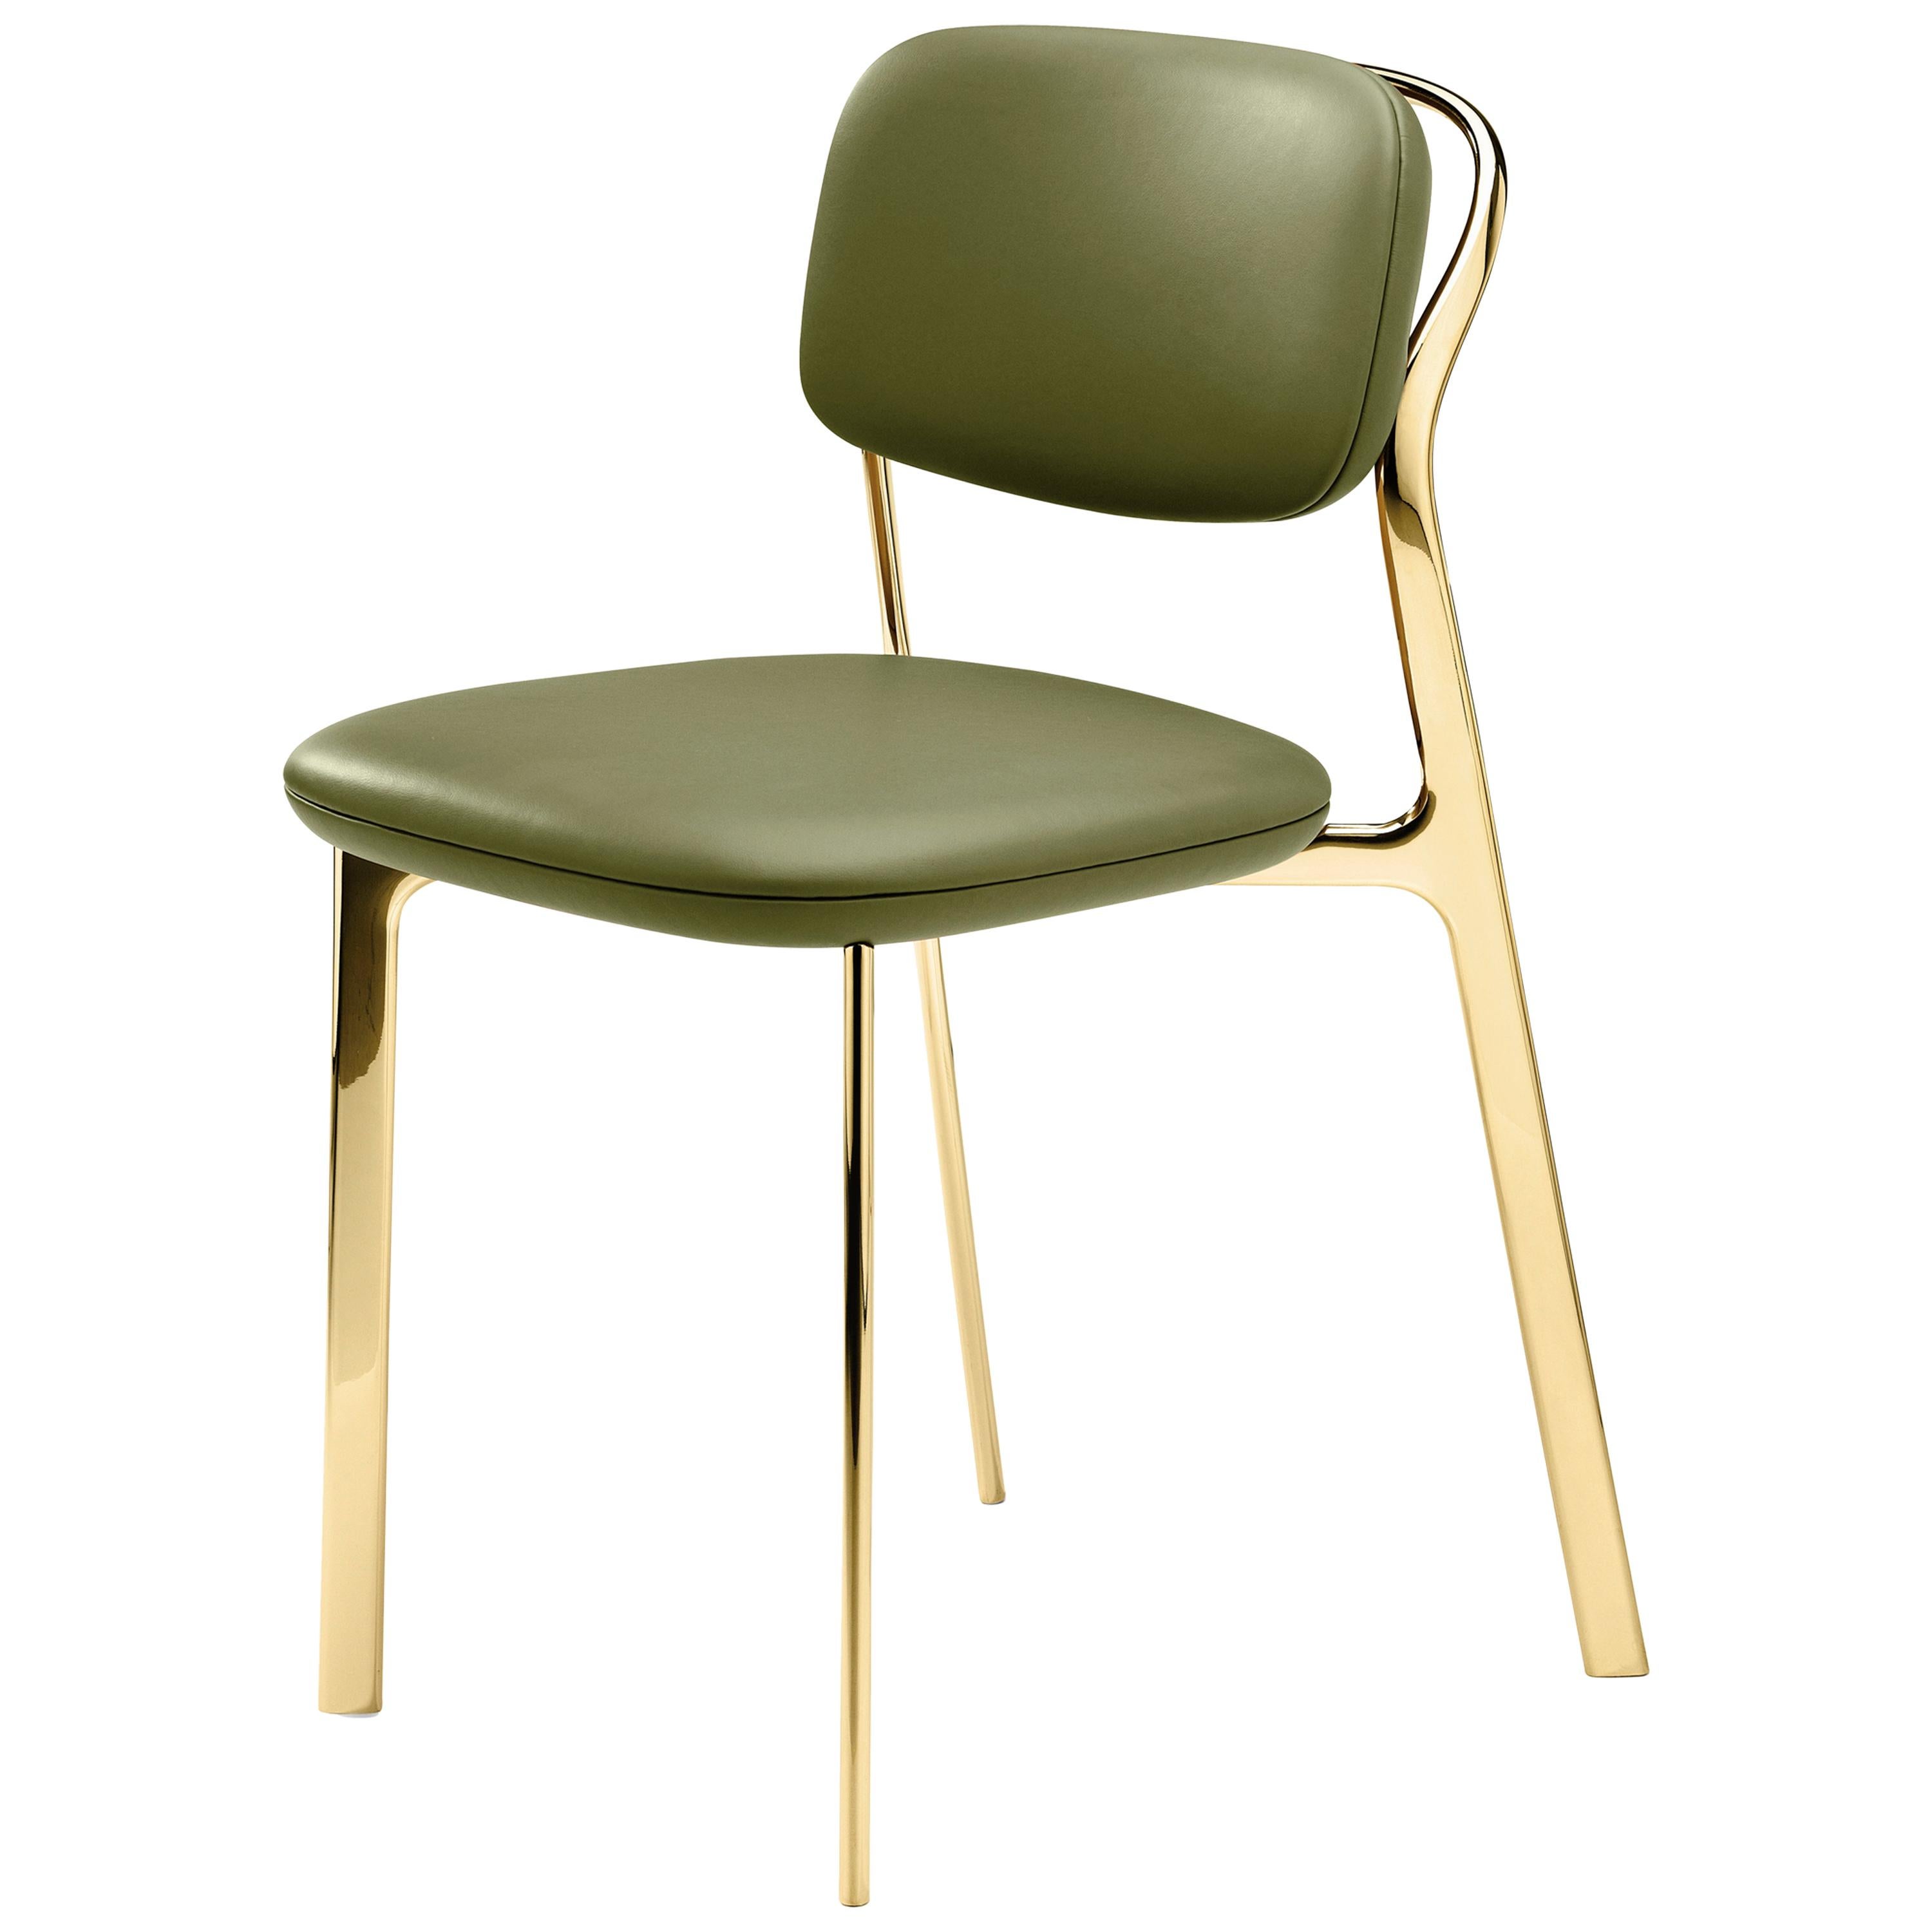 Coast Chair in Green Natural Leather with Polished Brass by Branch